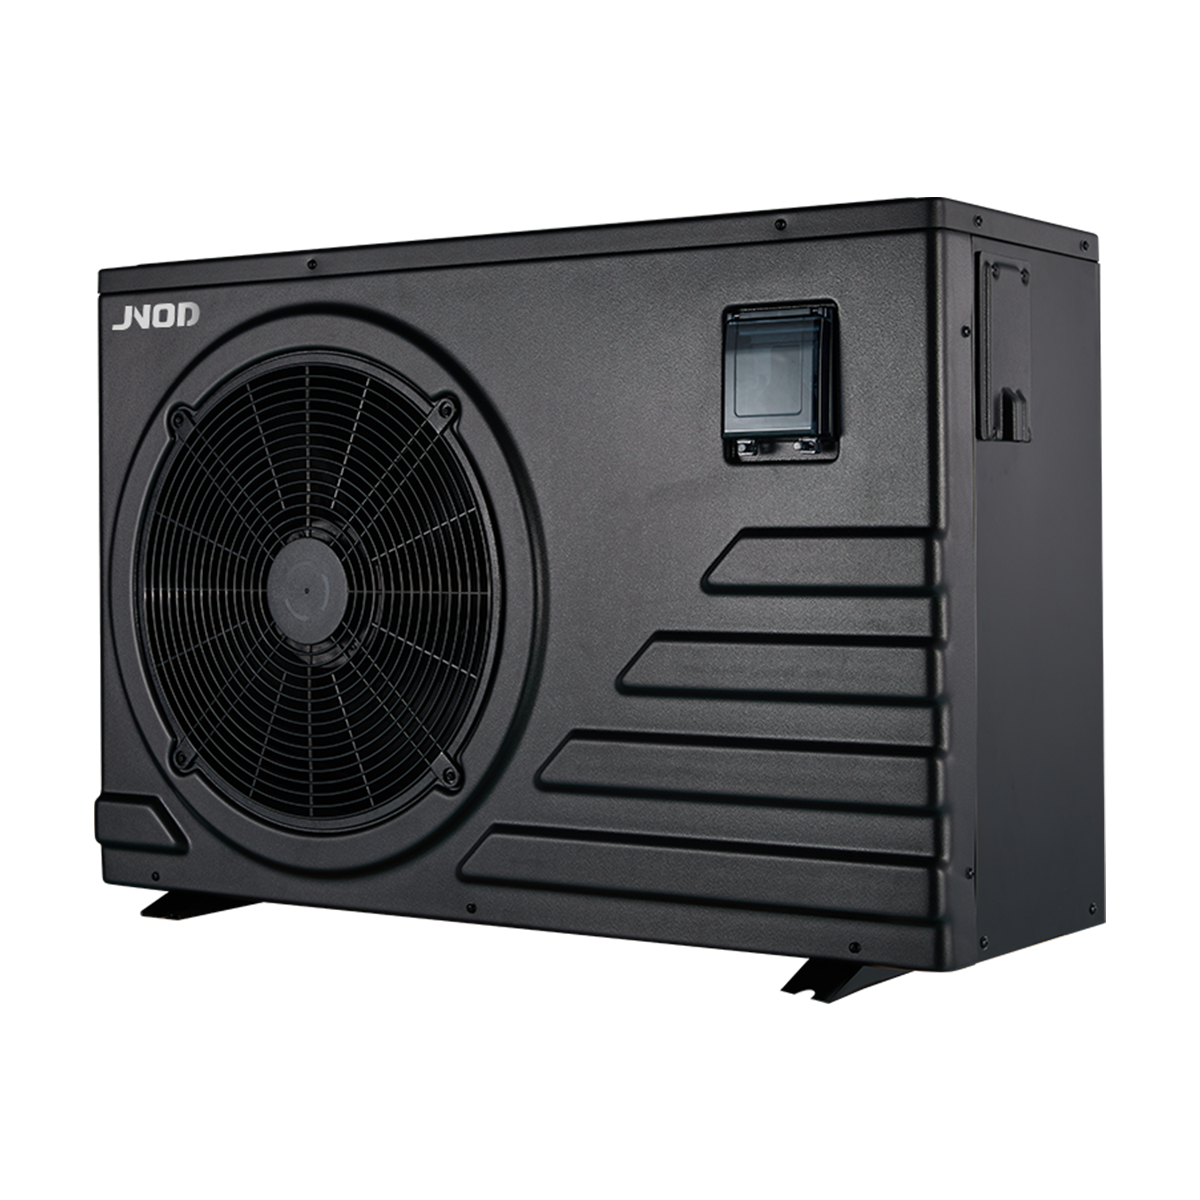 Air To Water Commercial Hotels Swimming Pool Heat Pump